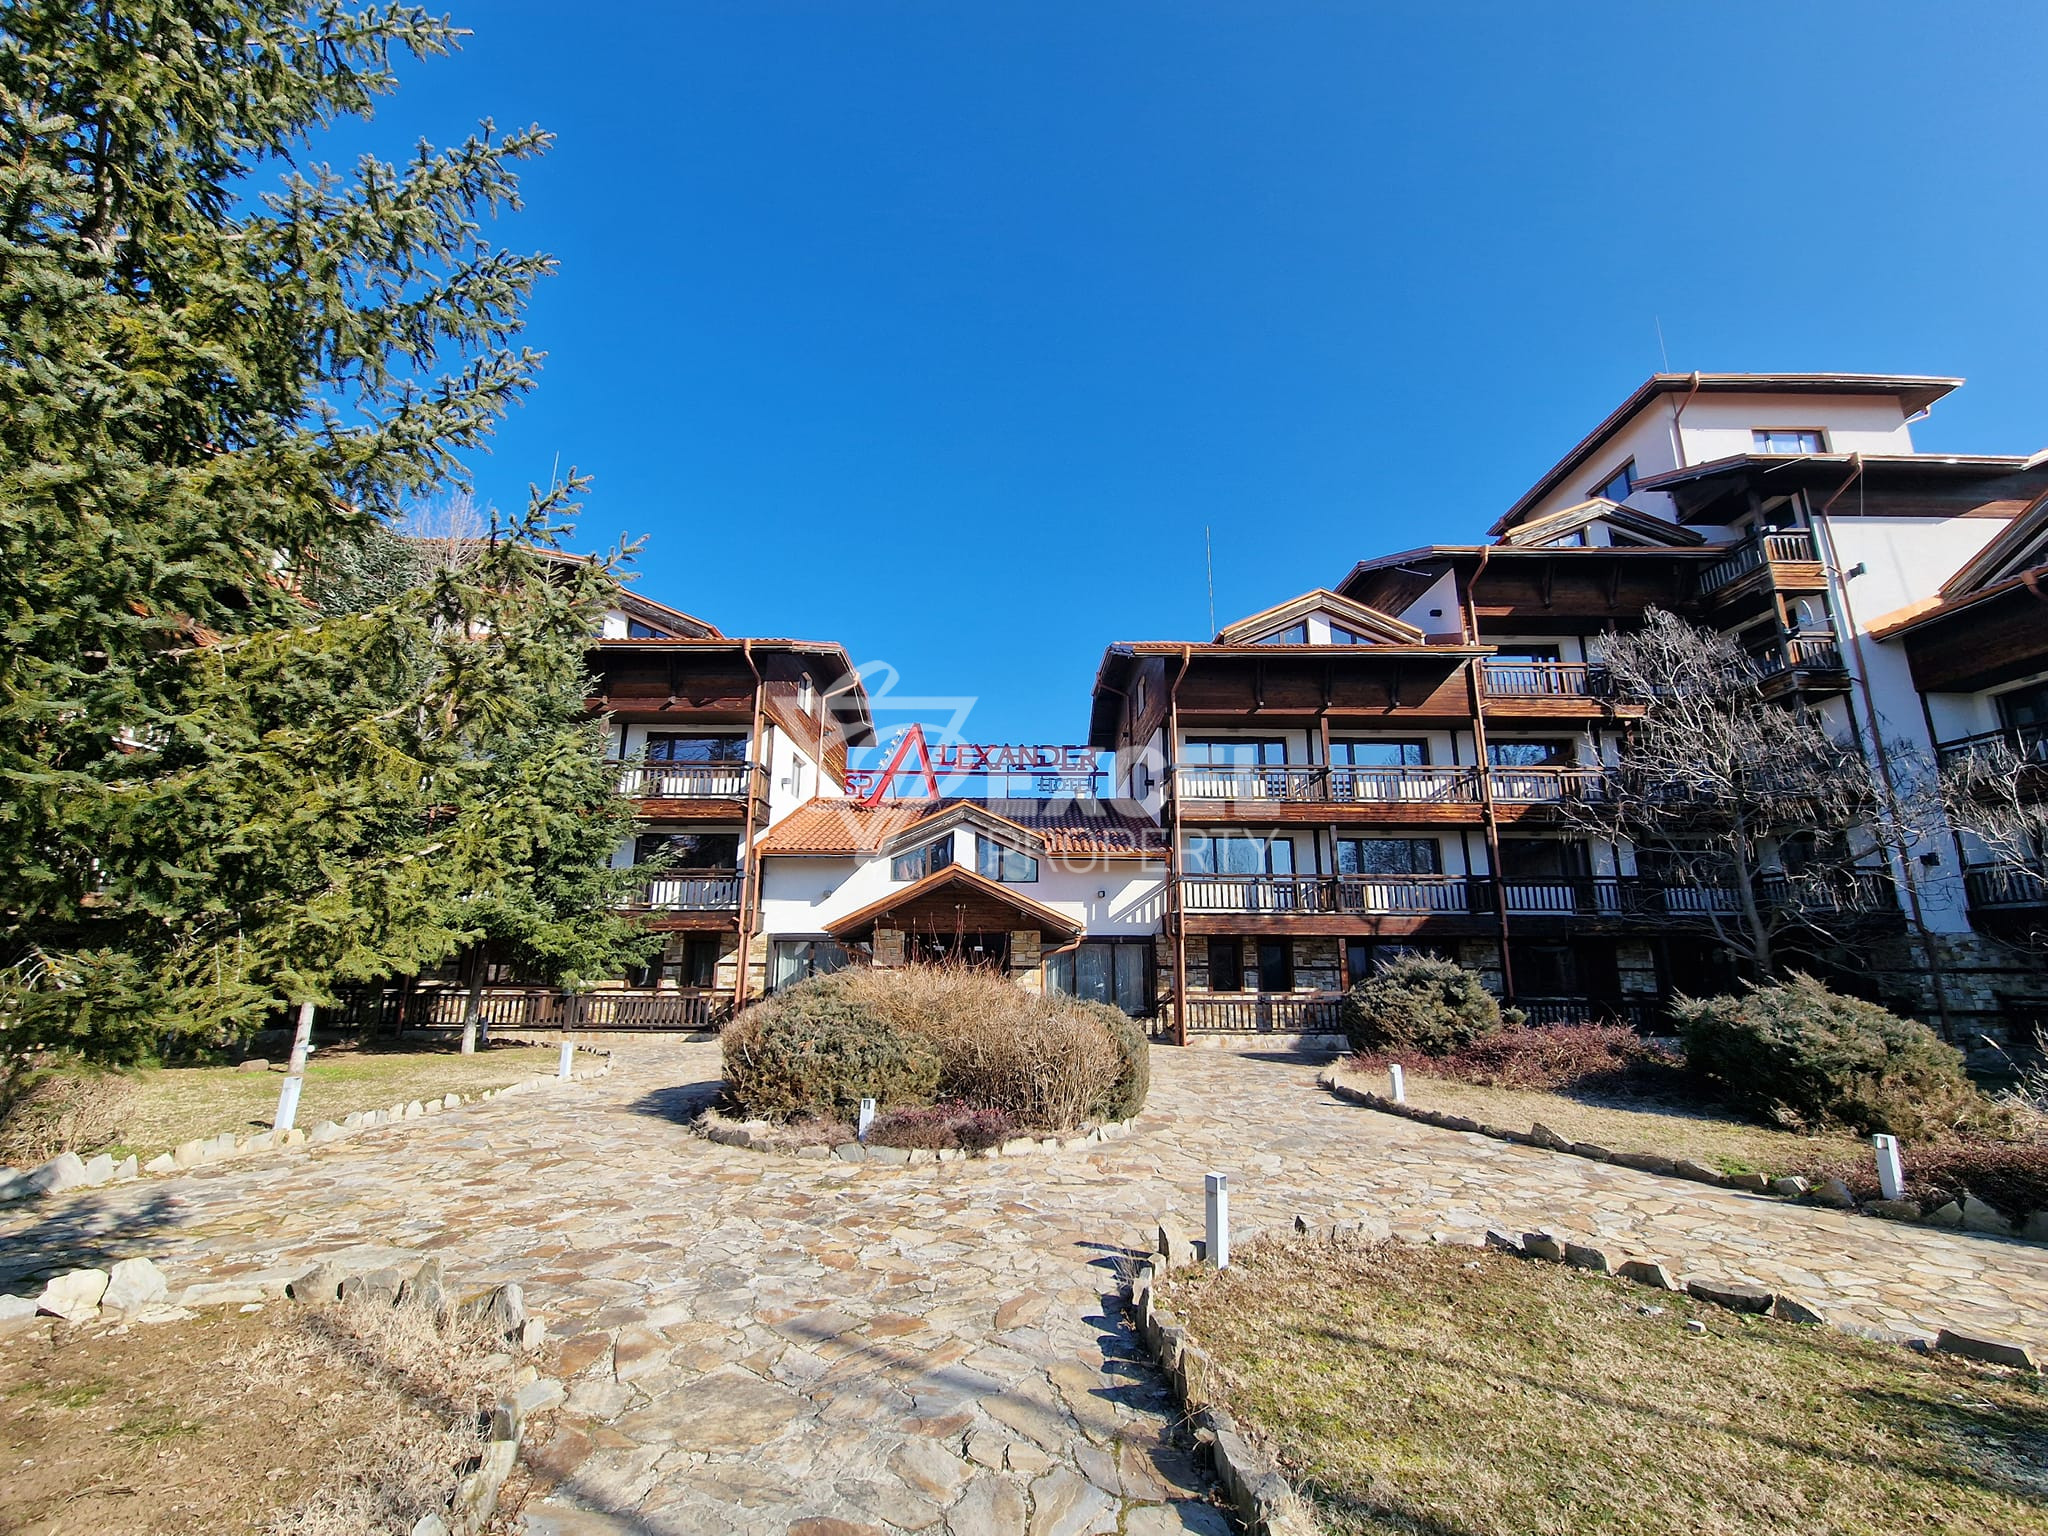 One bedroom apartment with east exposure for sale between Bansko and Banya! Bargain!